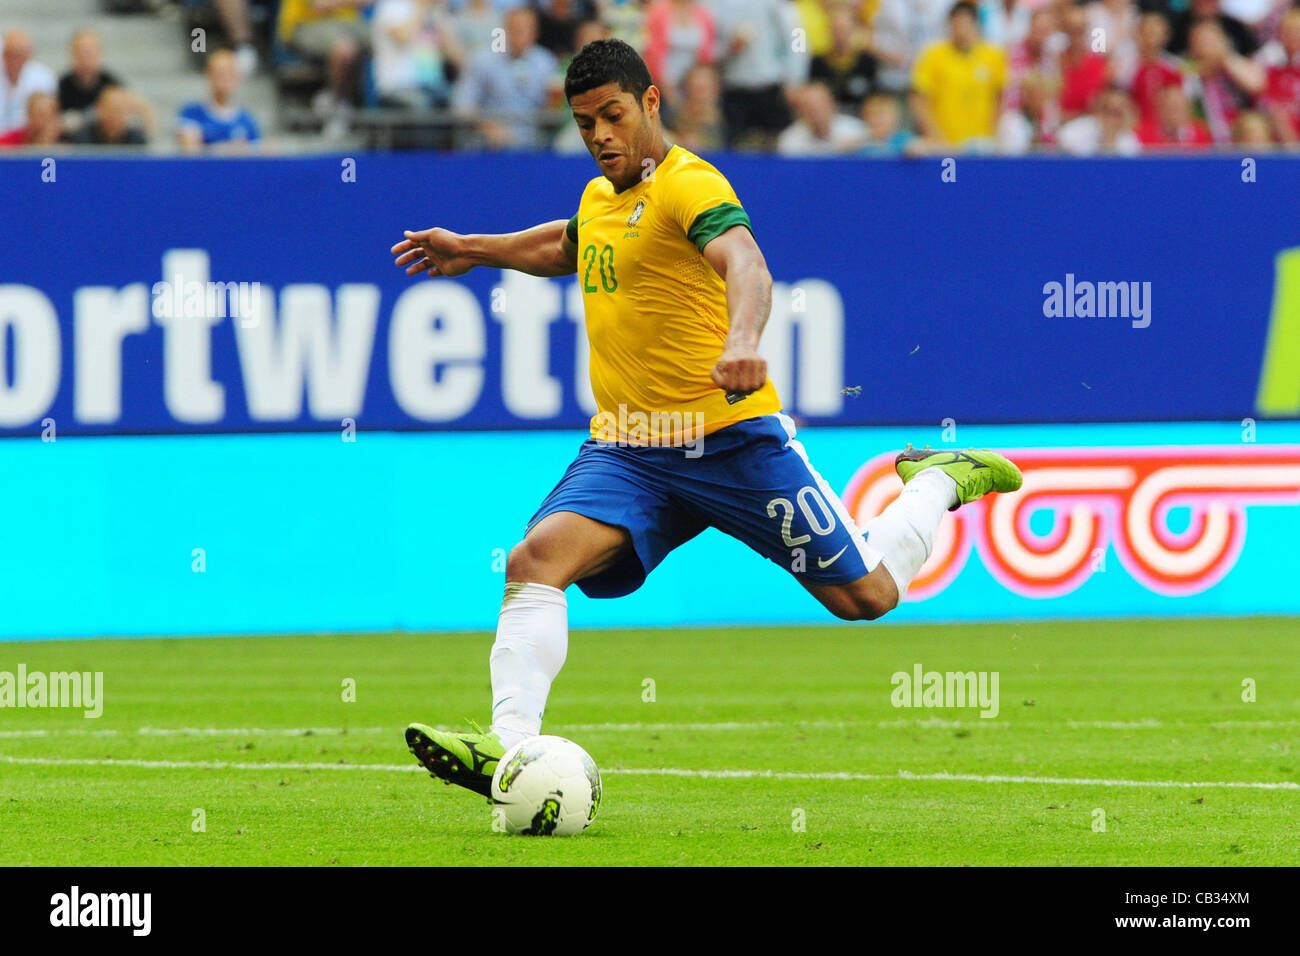 26.05.2012. Hamburg, Germany.  Brazil's Hulk scores the 3-0 goal during the international friendly soccer match between Denmark and Brazil at Imtech Arena in Hamburg, Germany, 26 may 2012. Stock Photo